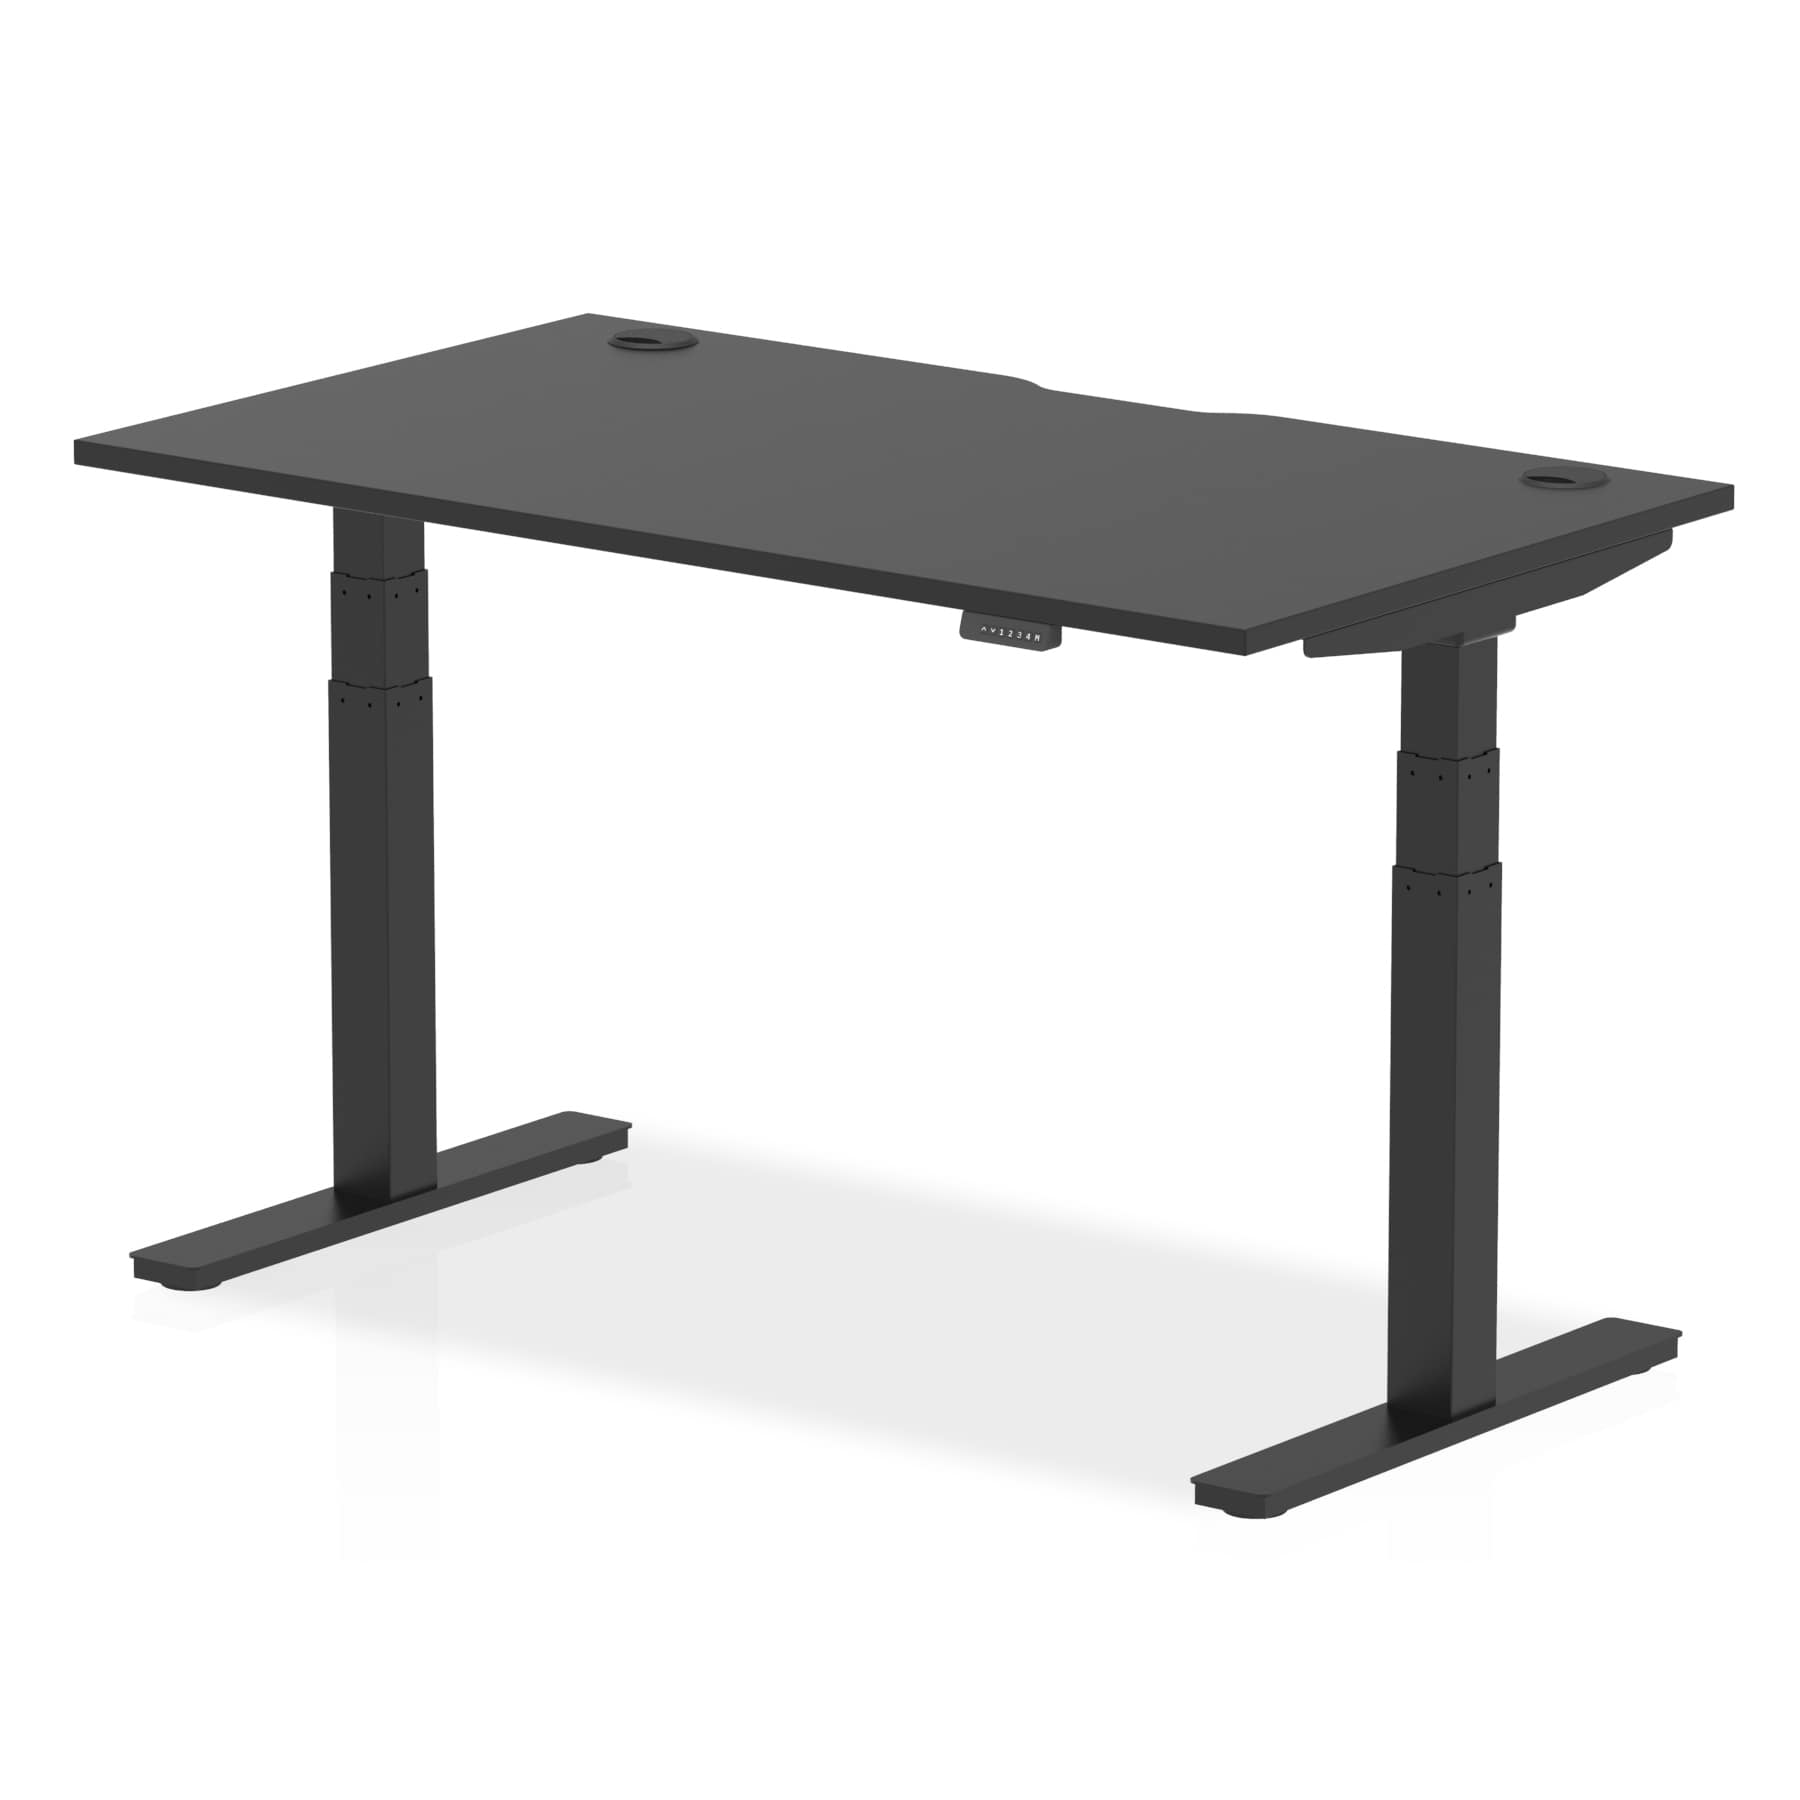 Air Black Series Height Adjustable Desk - Rectangular MFC Top, 1200-1800mm Width, 800mm Depth, 660-1310mm Height, 3 Frame Colors, 5-Year Guarantee